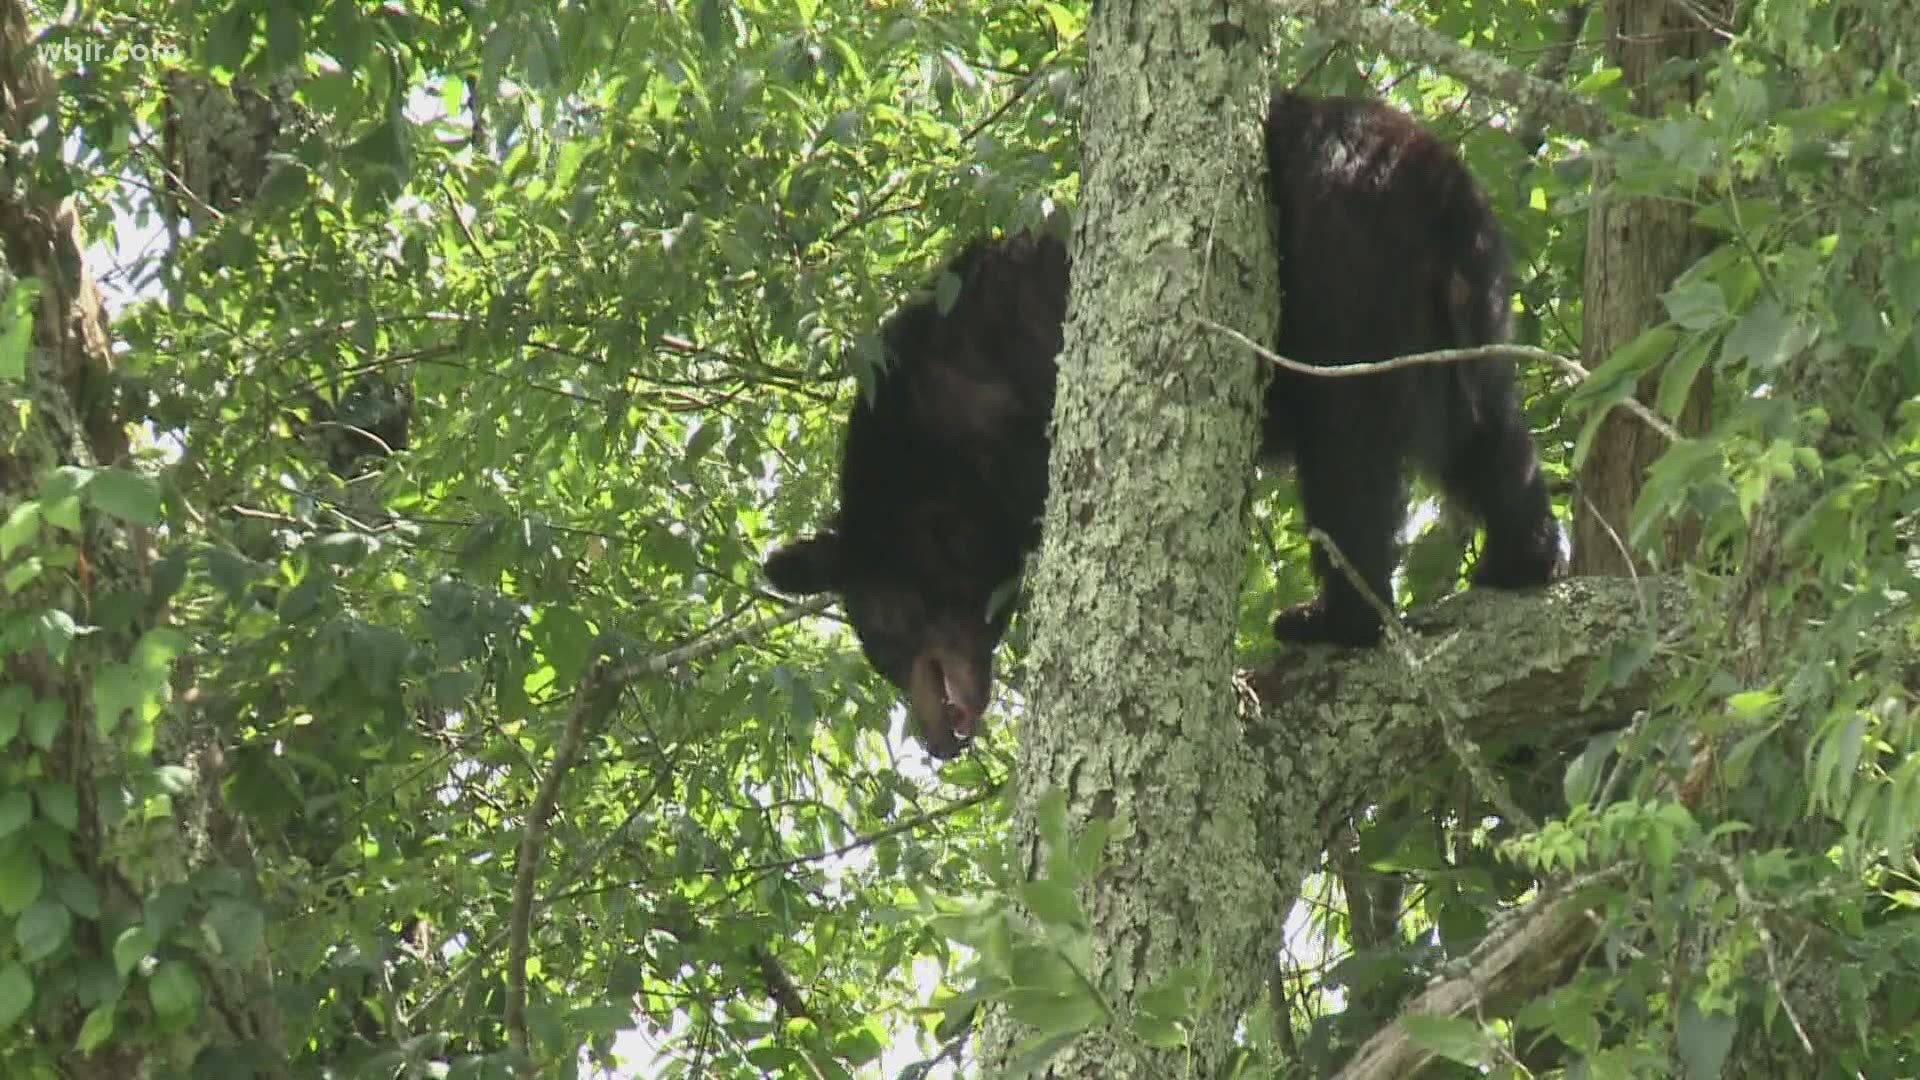 According to Appalachian Bear Rescue, more and more bears are coming around homes and other buildings. Here's what to know if you see a bear in your yard.